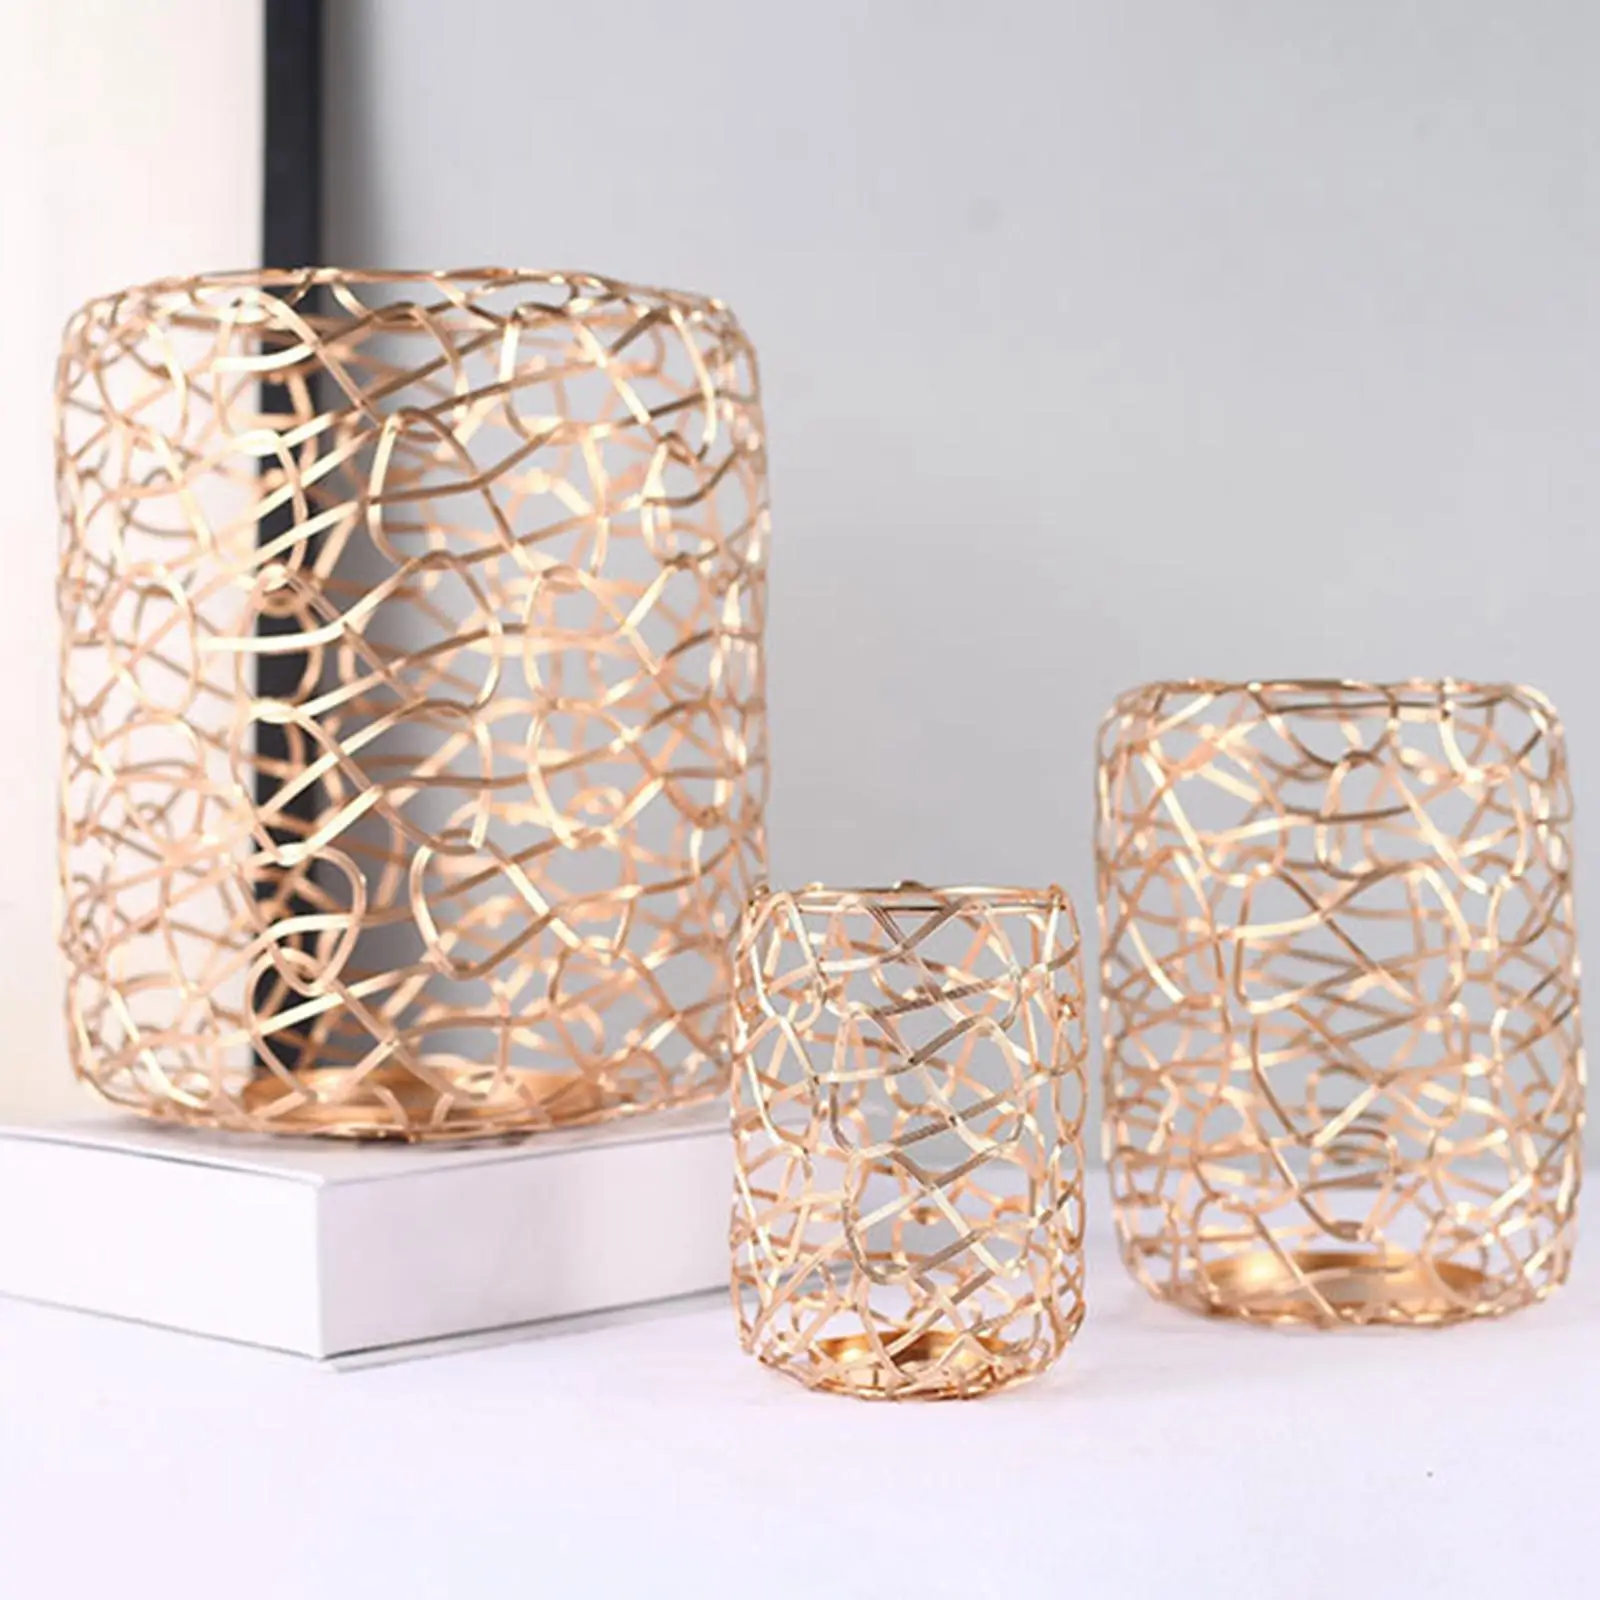 3Pcs Rustic Wire Candle Holder Candlestick Stand Tealight Candle Holders Ornament Crafts for Party Wedding Dinner Home Decor